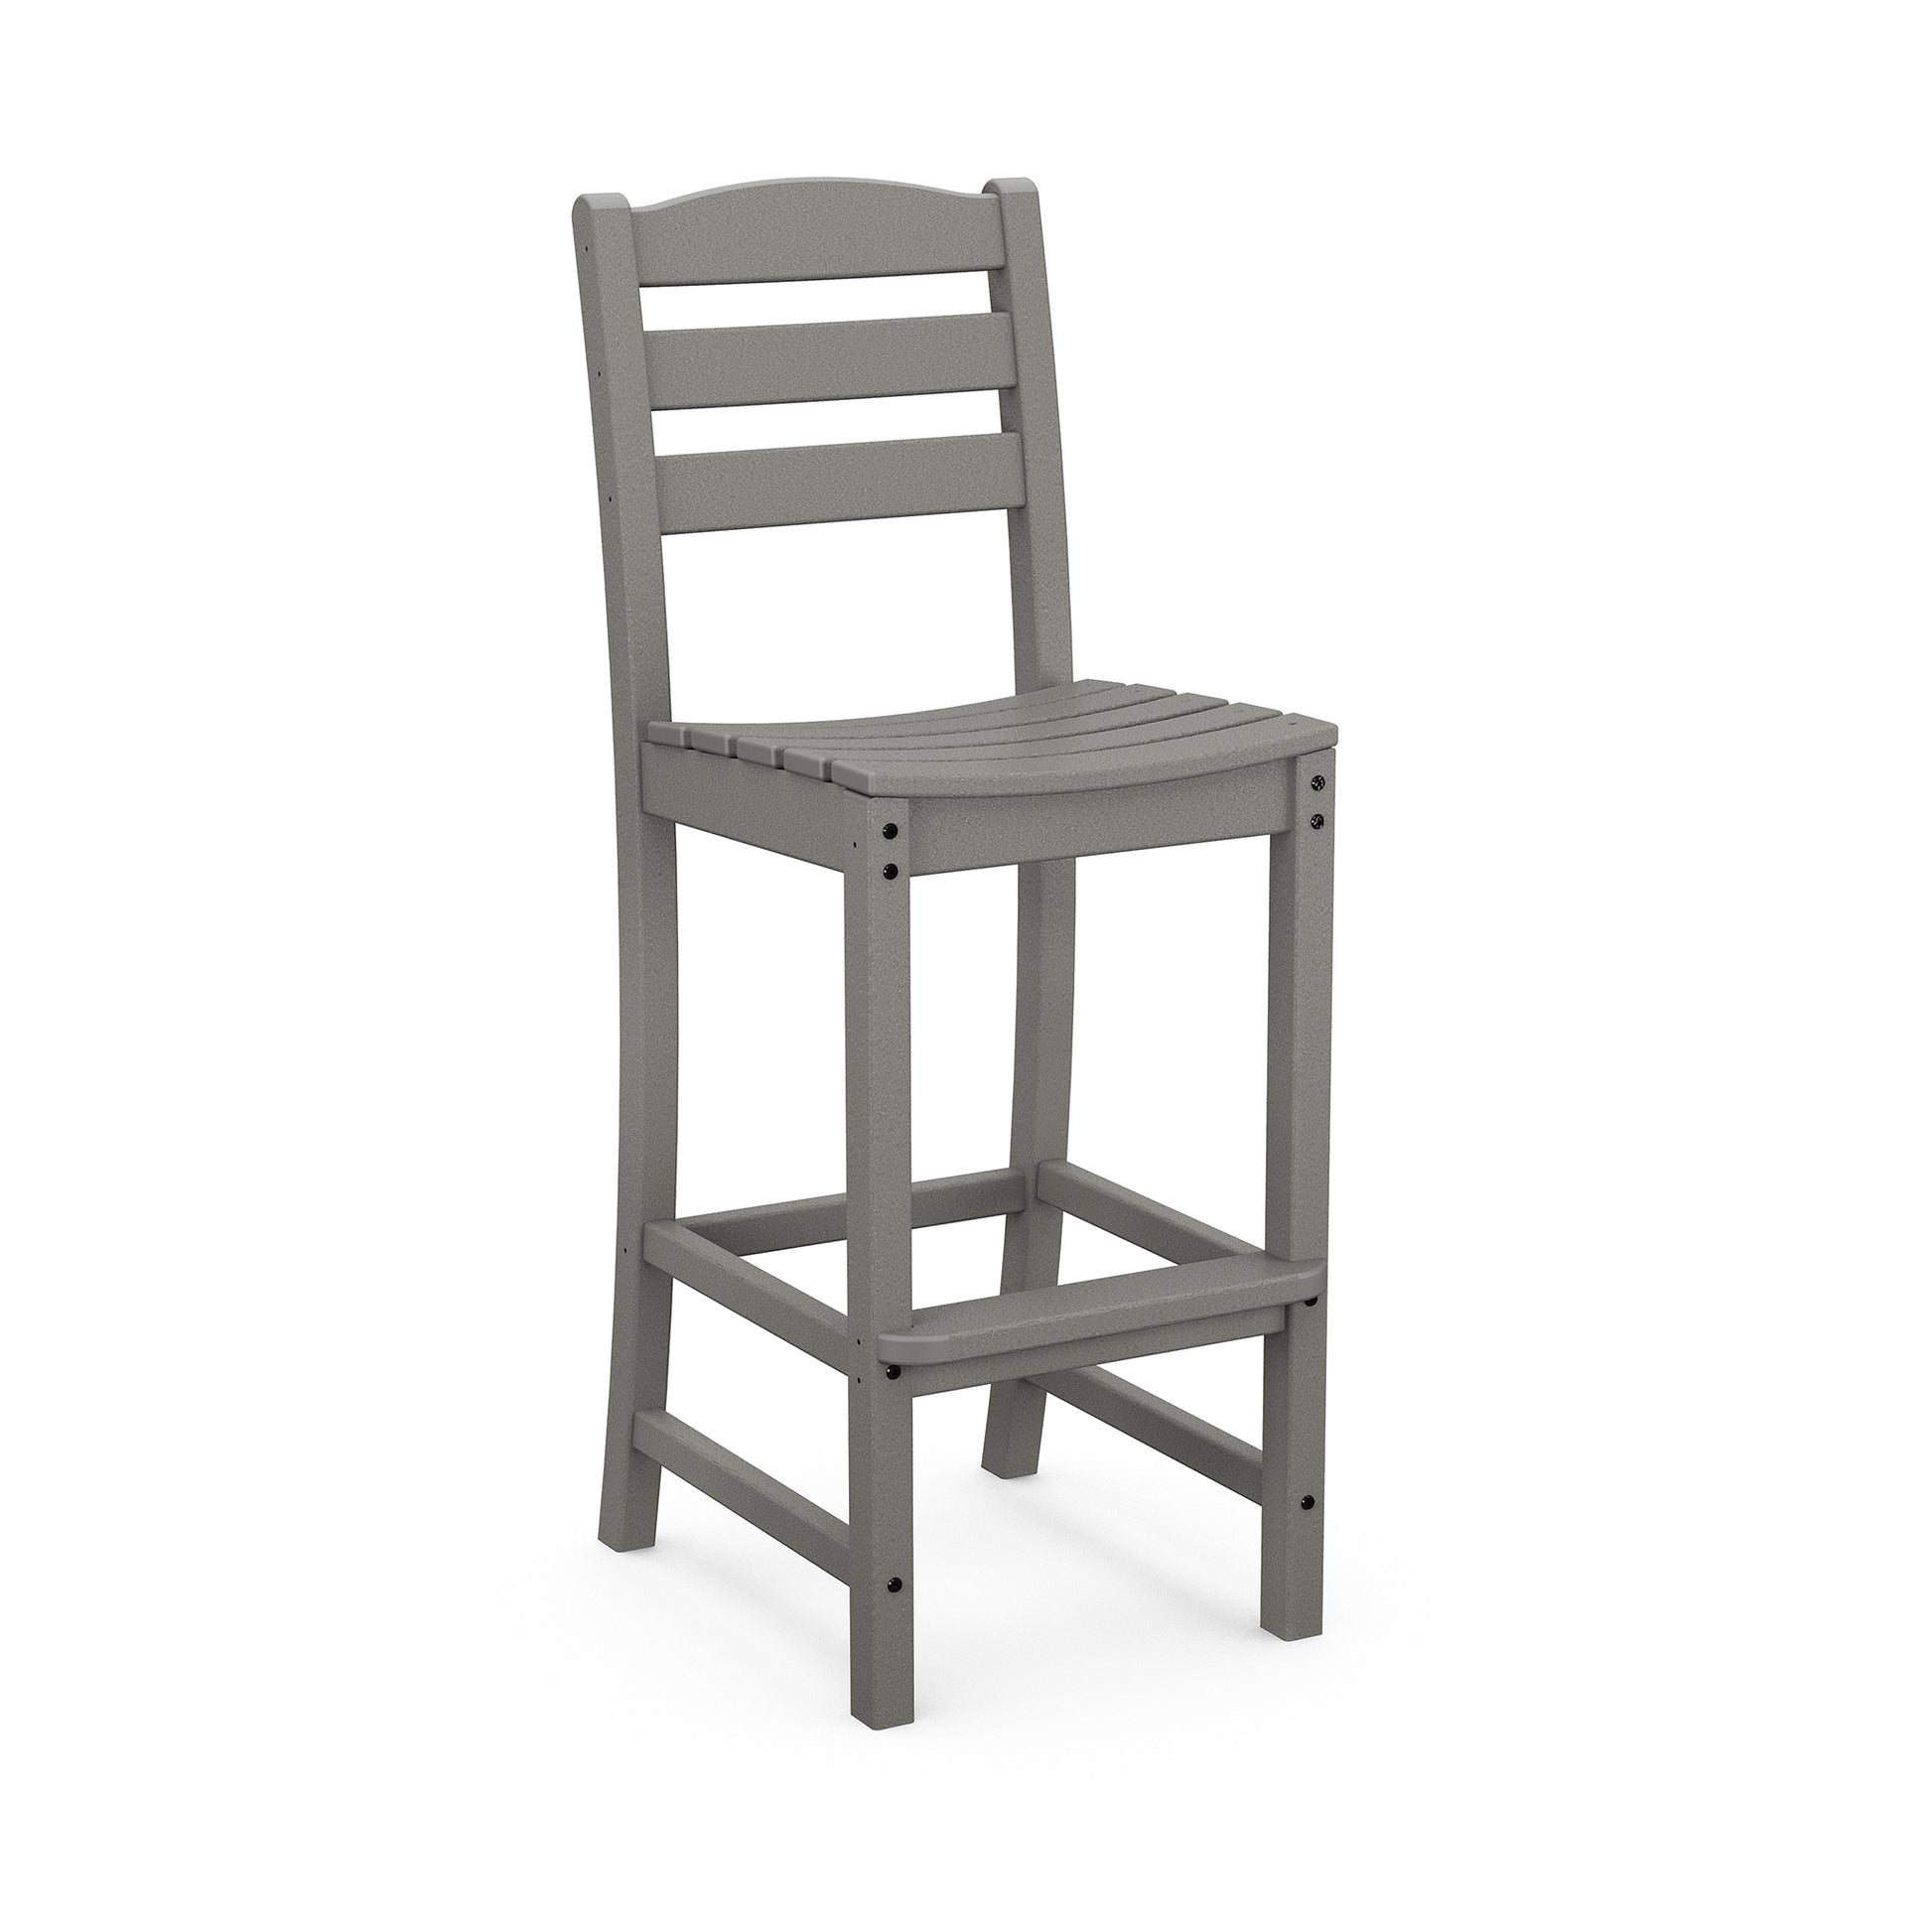 A grey POLYWOOD La Casa Cafe Outdoor Bar Side Chair with a high backrest and square seat, set against a plain white background. The chair has four legs and horizontal slats on the seat.